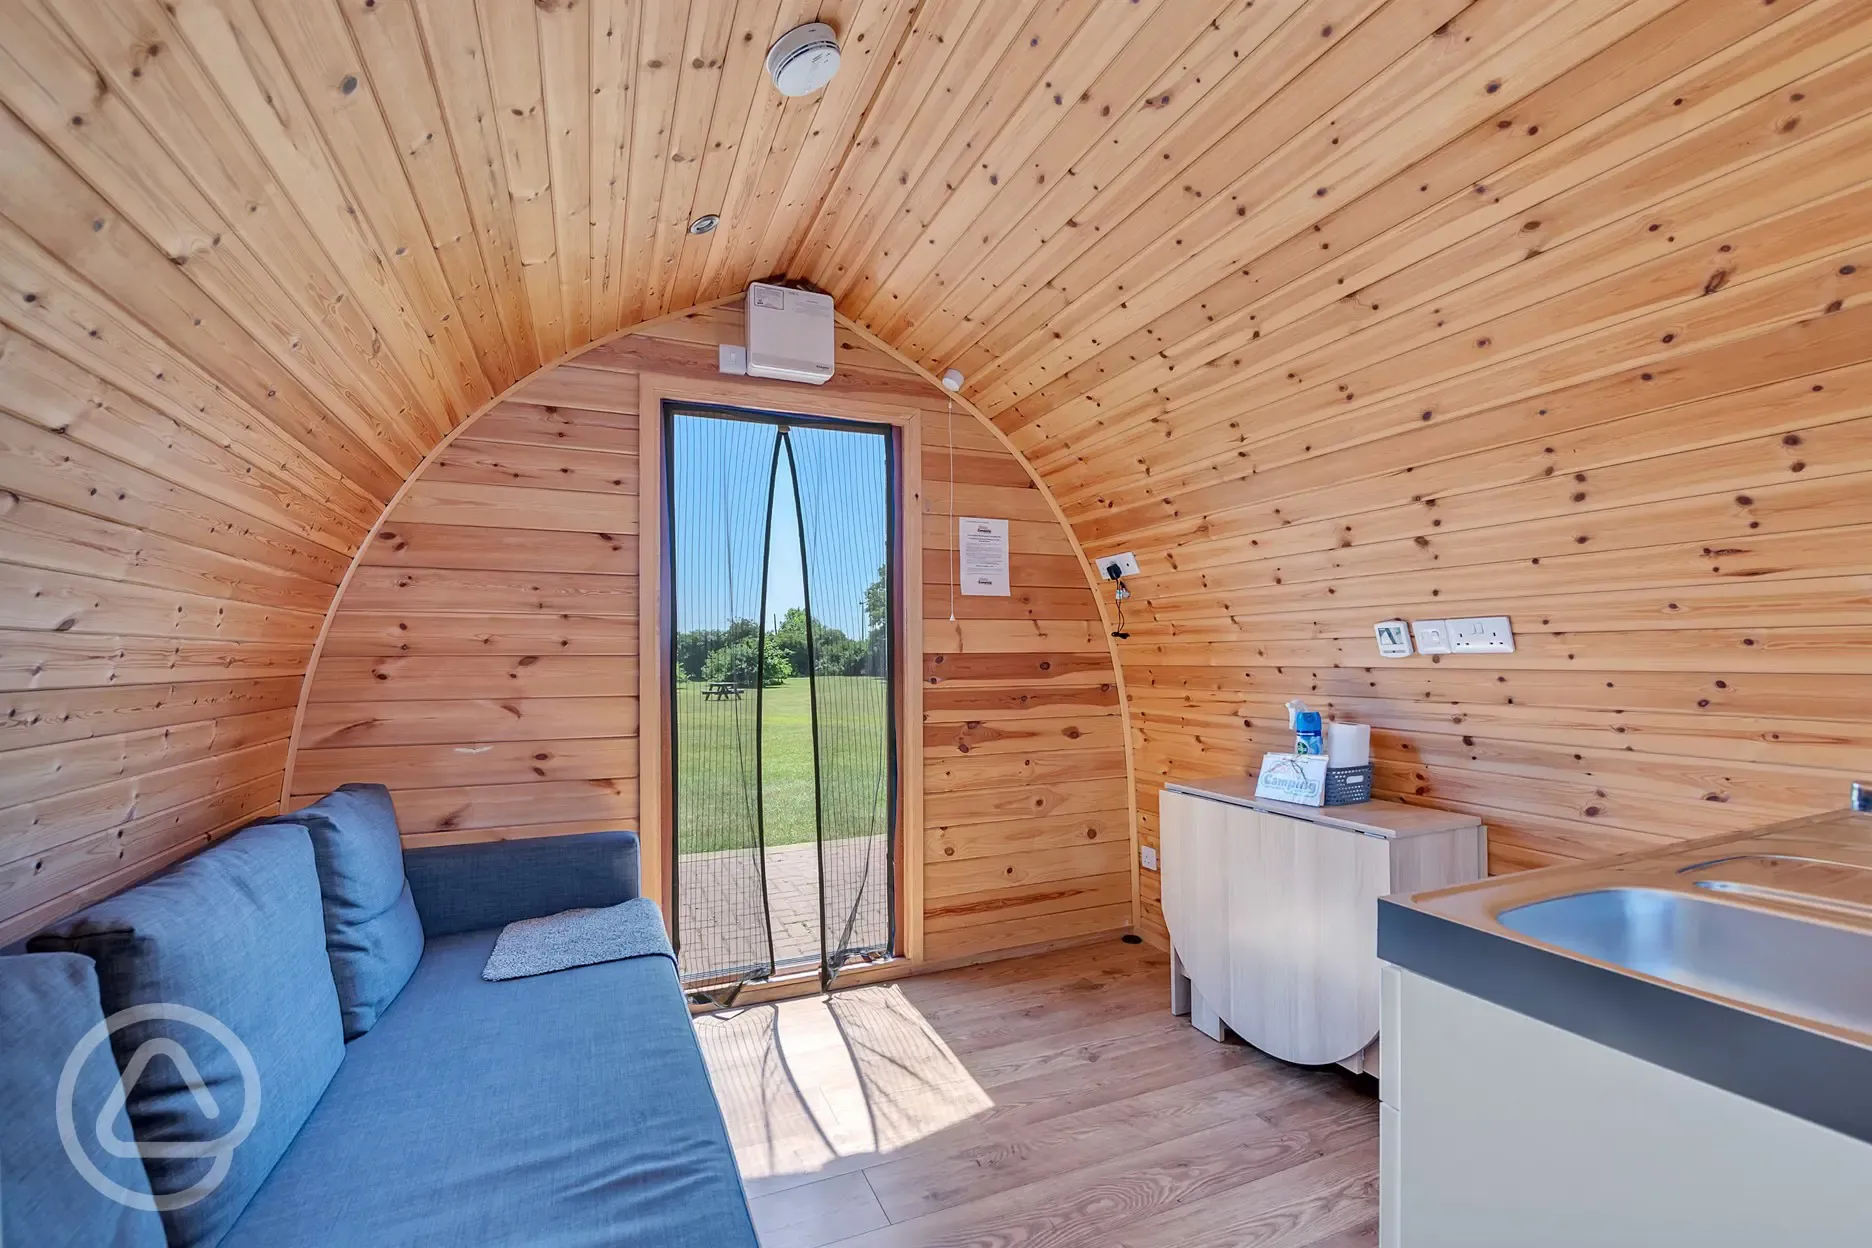 Cosy Family Pod Interior looking out